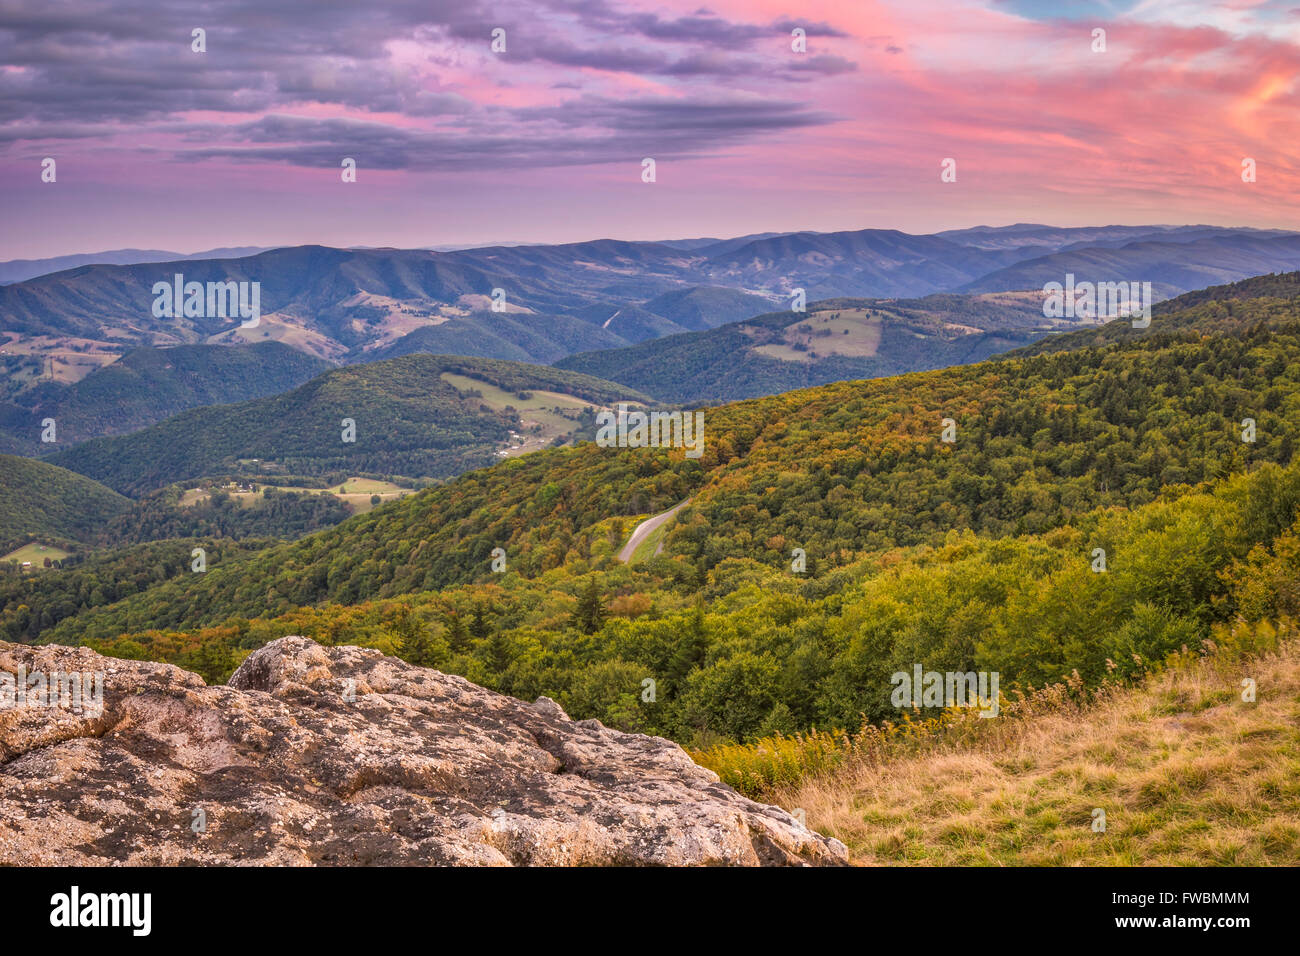 Twilight begins to settle over the gently rolling hills and mountains from atop Spruce Knob in West Virginia. Stock Photo